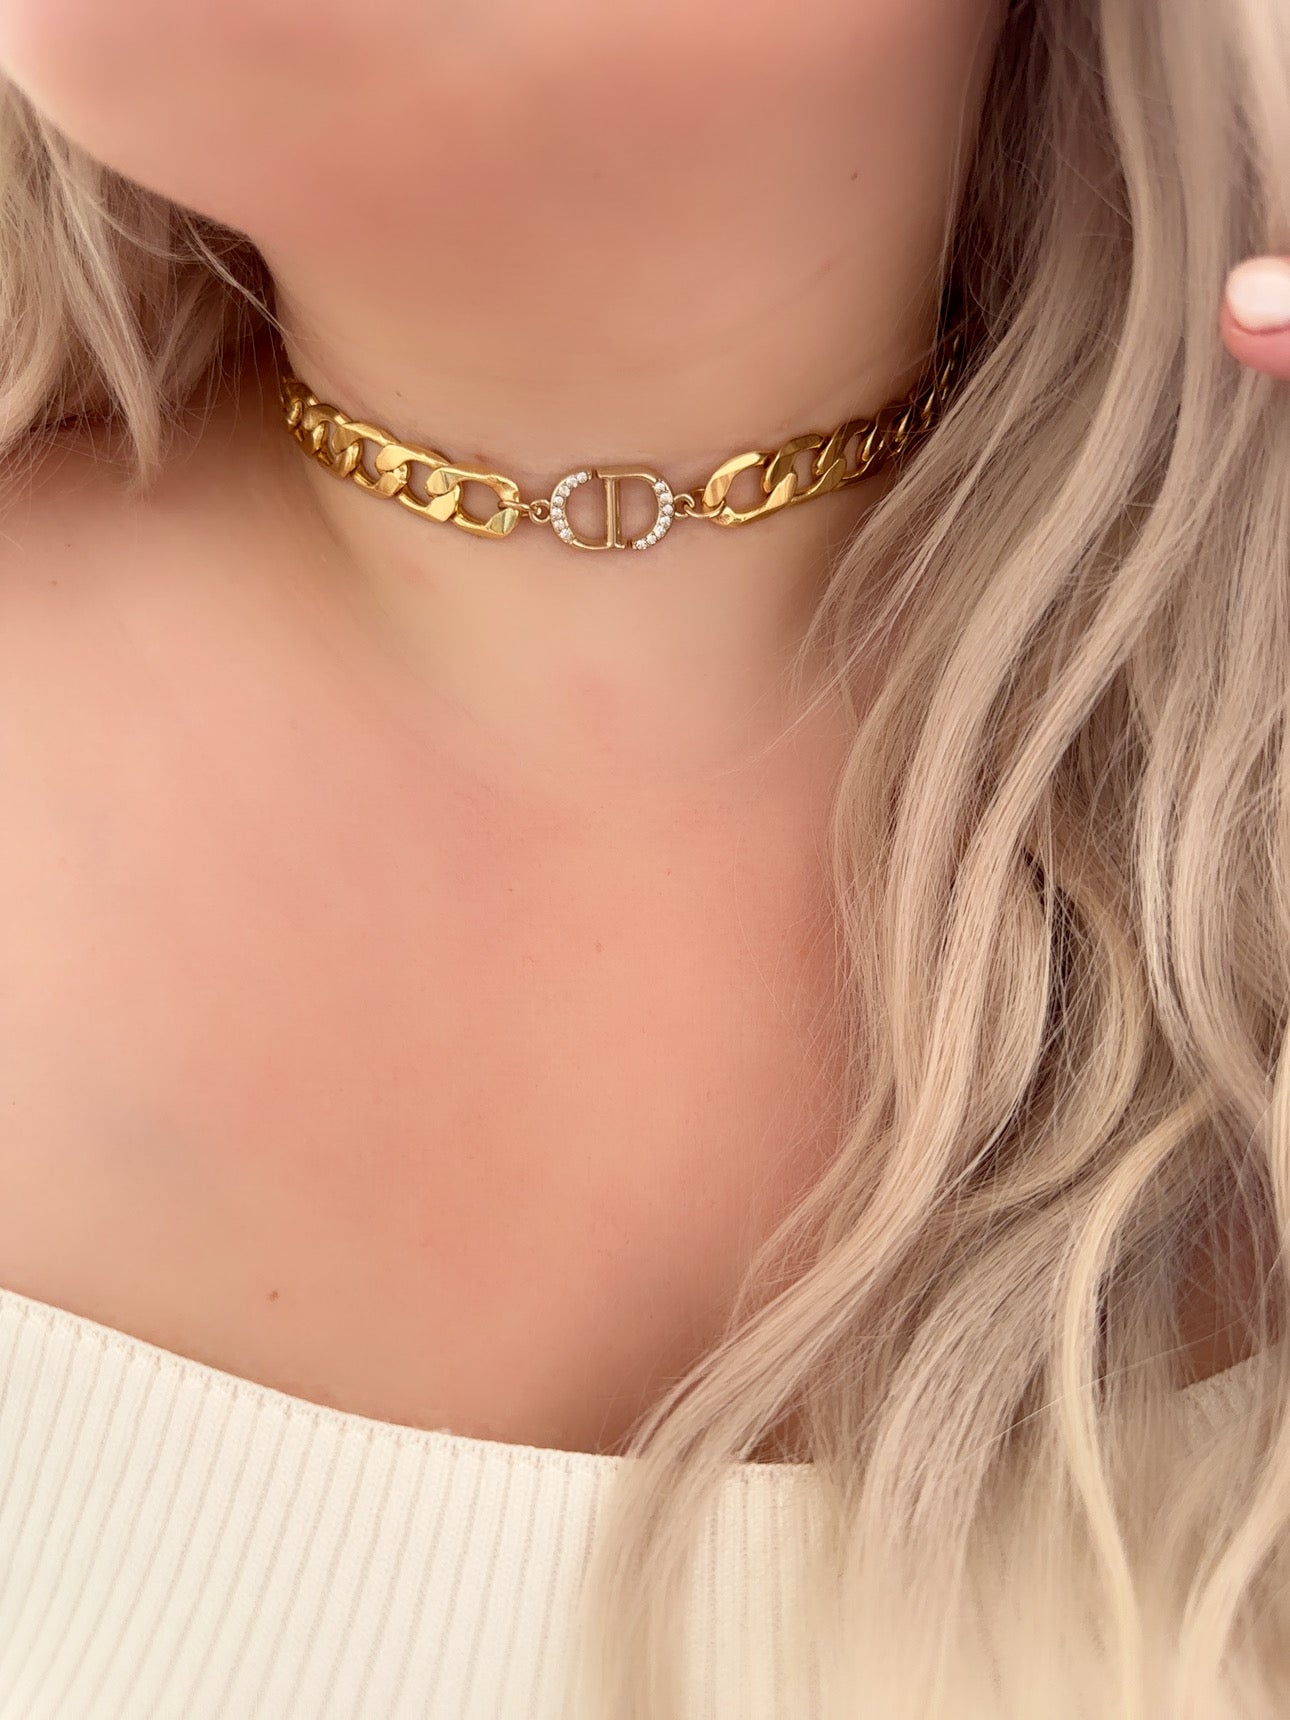 The “Christian Choker” Necklace